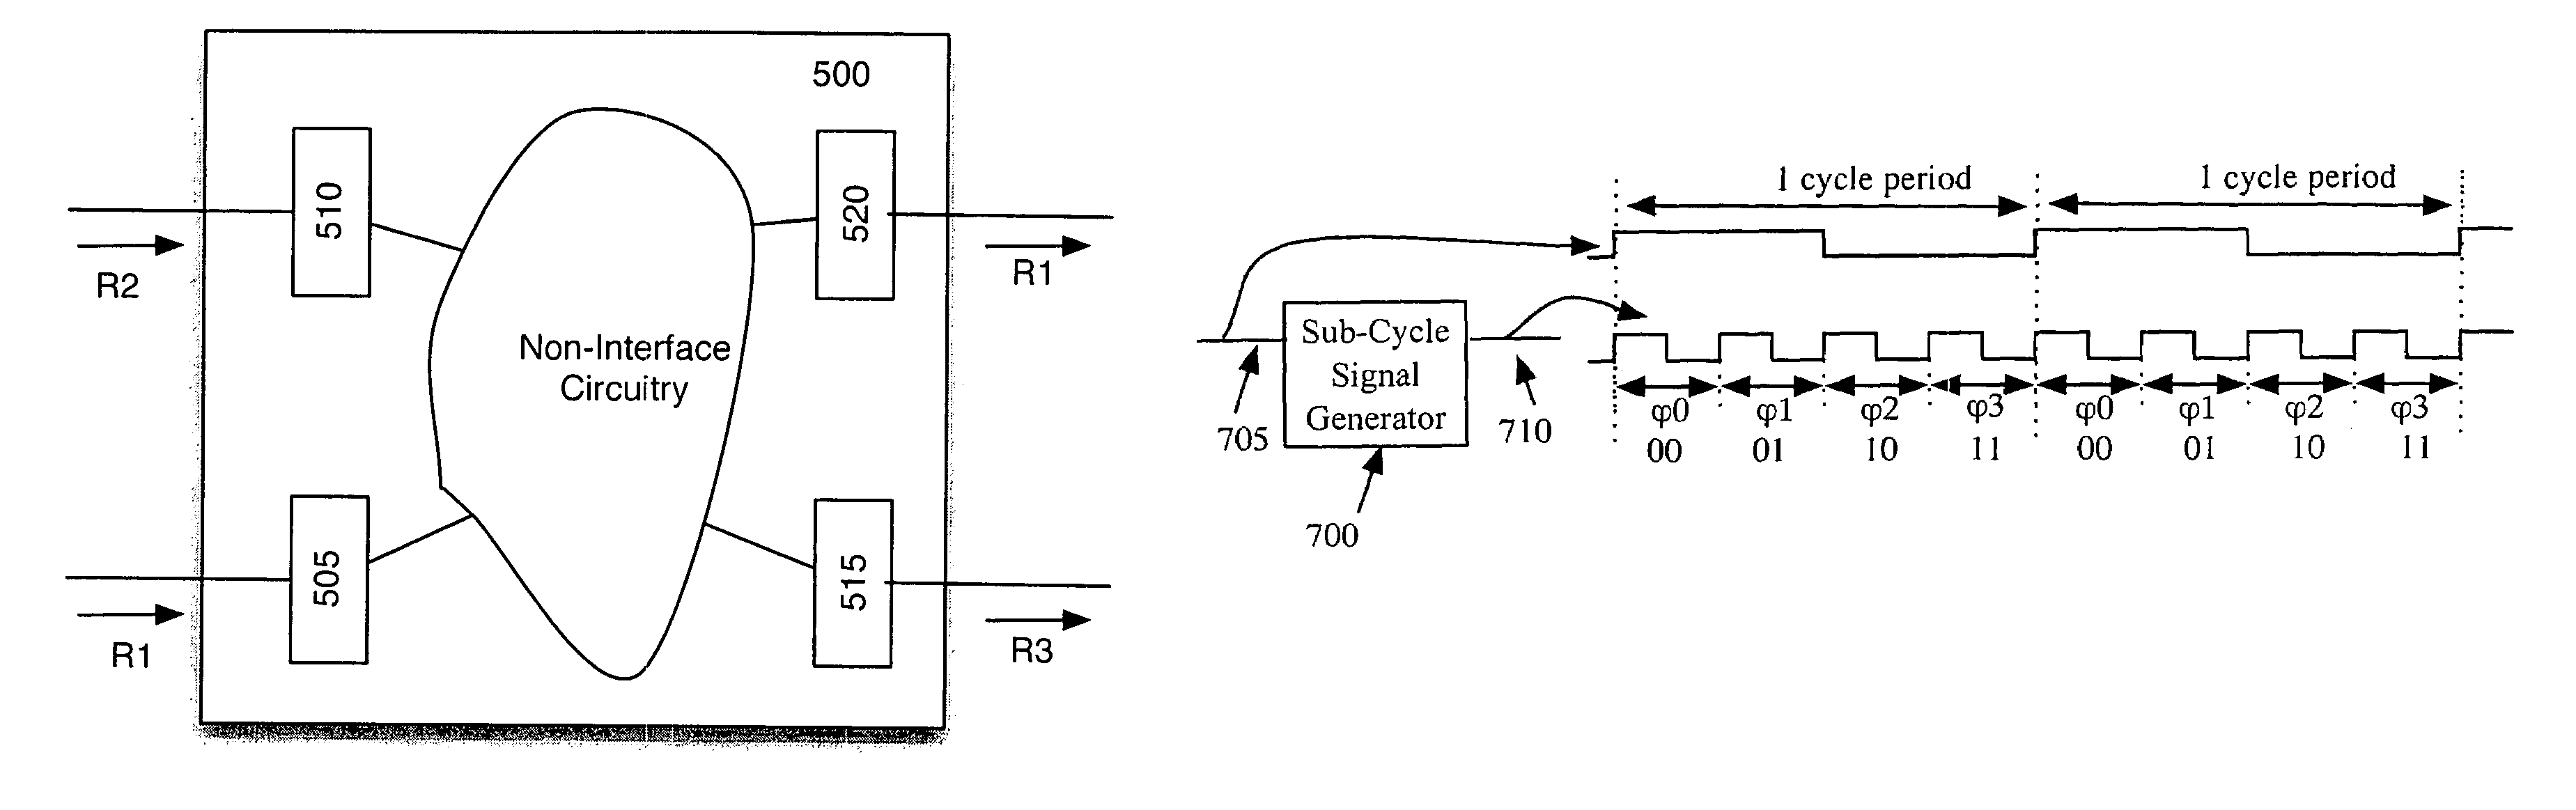 Configurable circuits, IC's, and systems